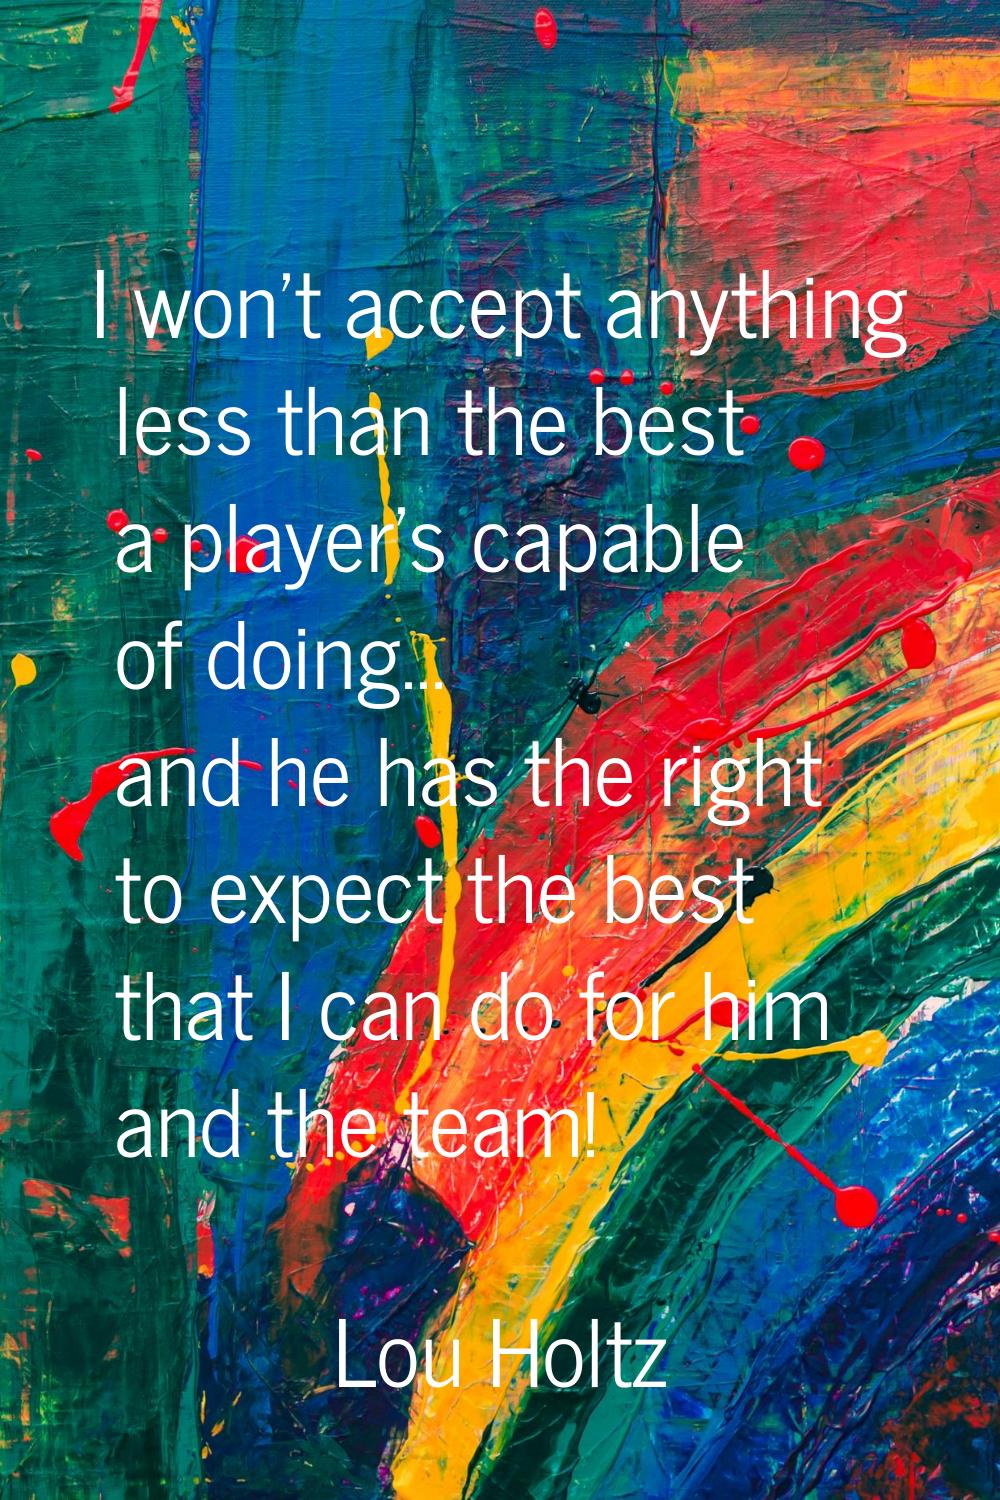 I won't accept anything less than the best a player's capable of doing... and he has the right to e